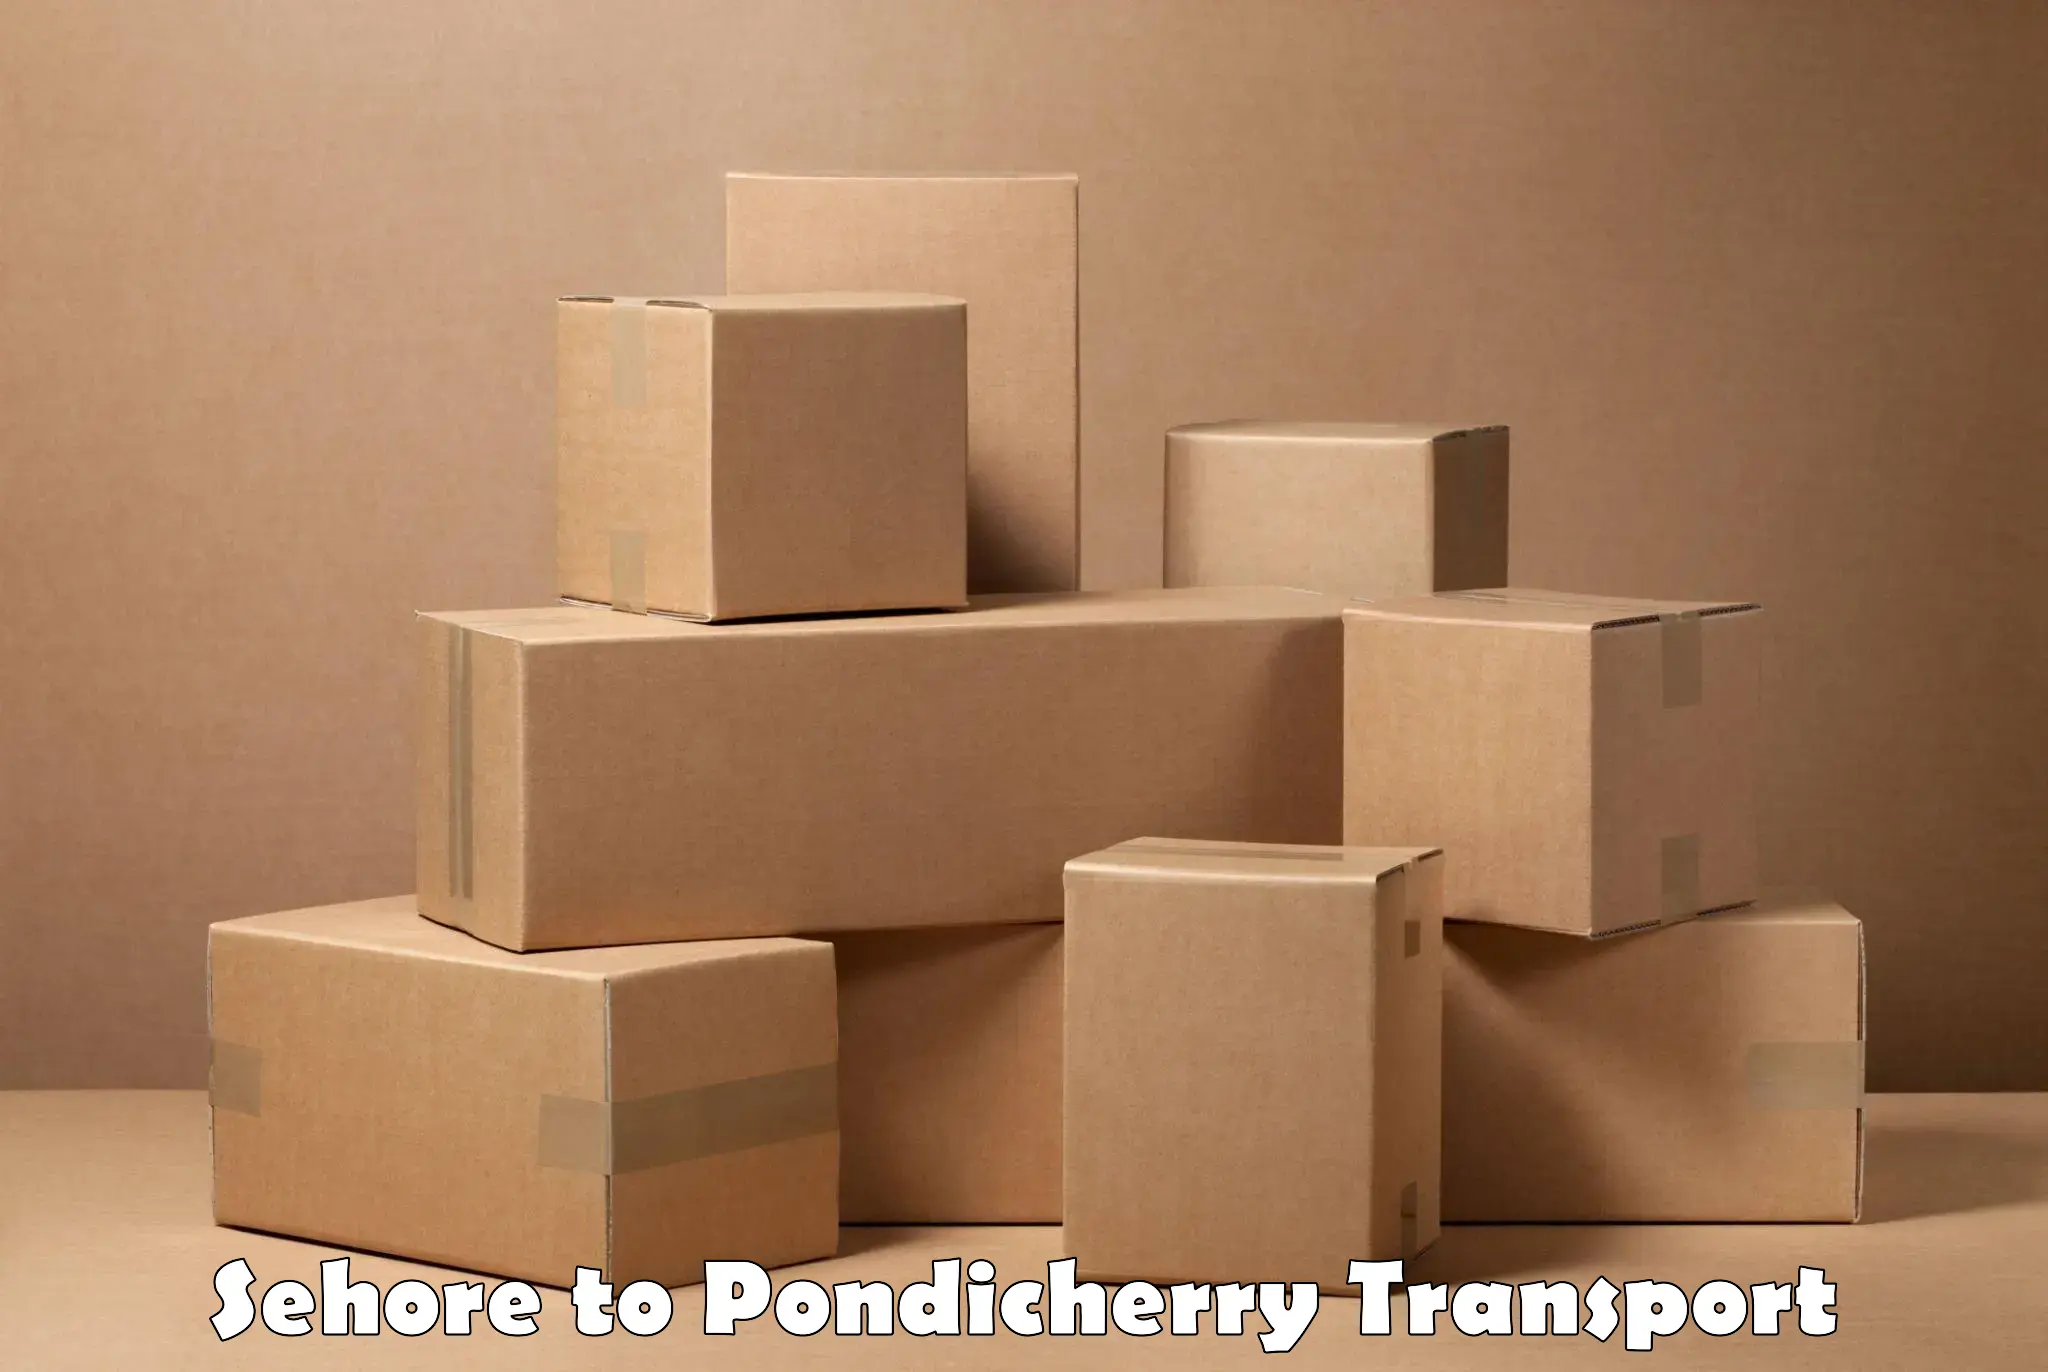 Transport in sharing Sehore to Pondicherry